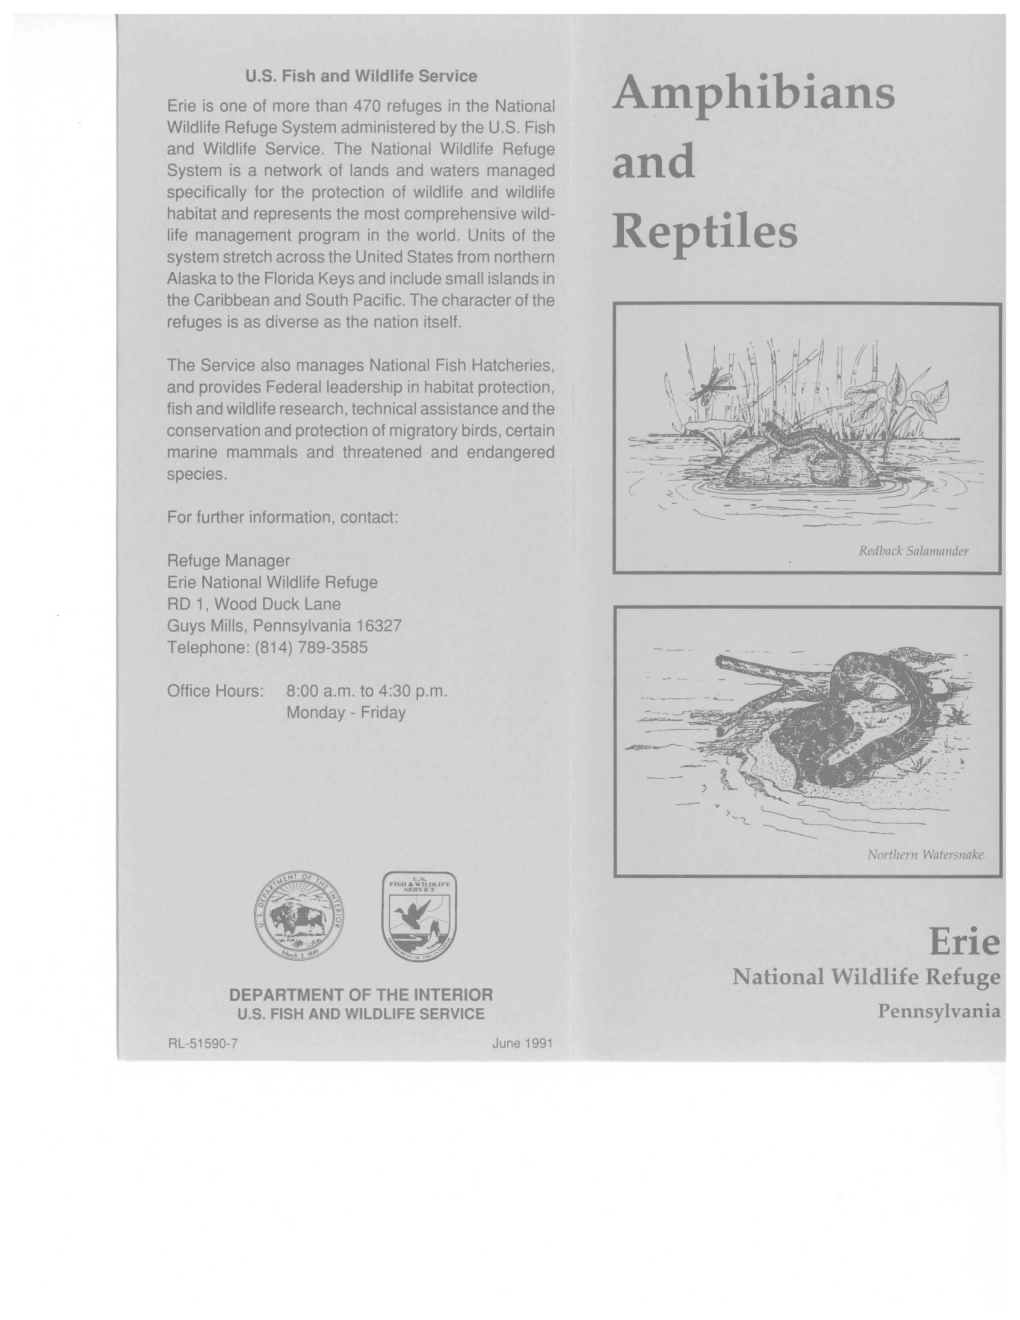 Antphibians and Reptiles